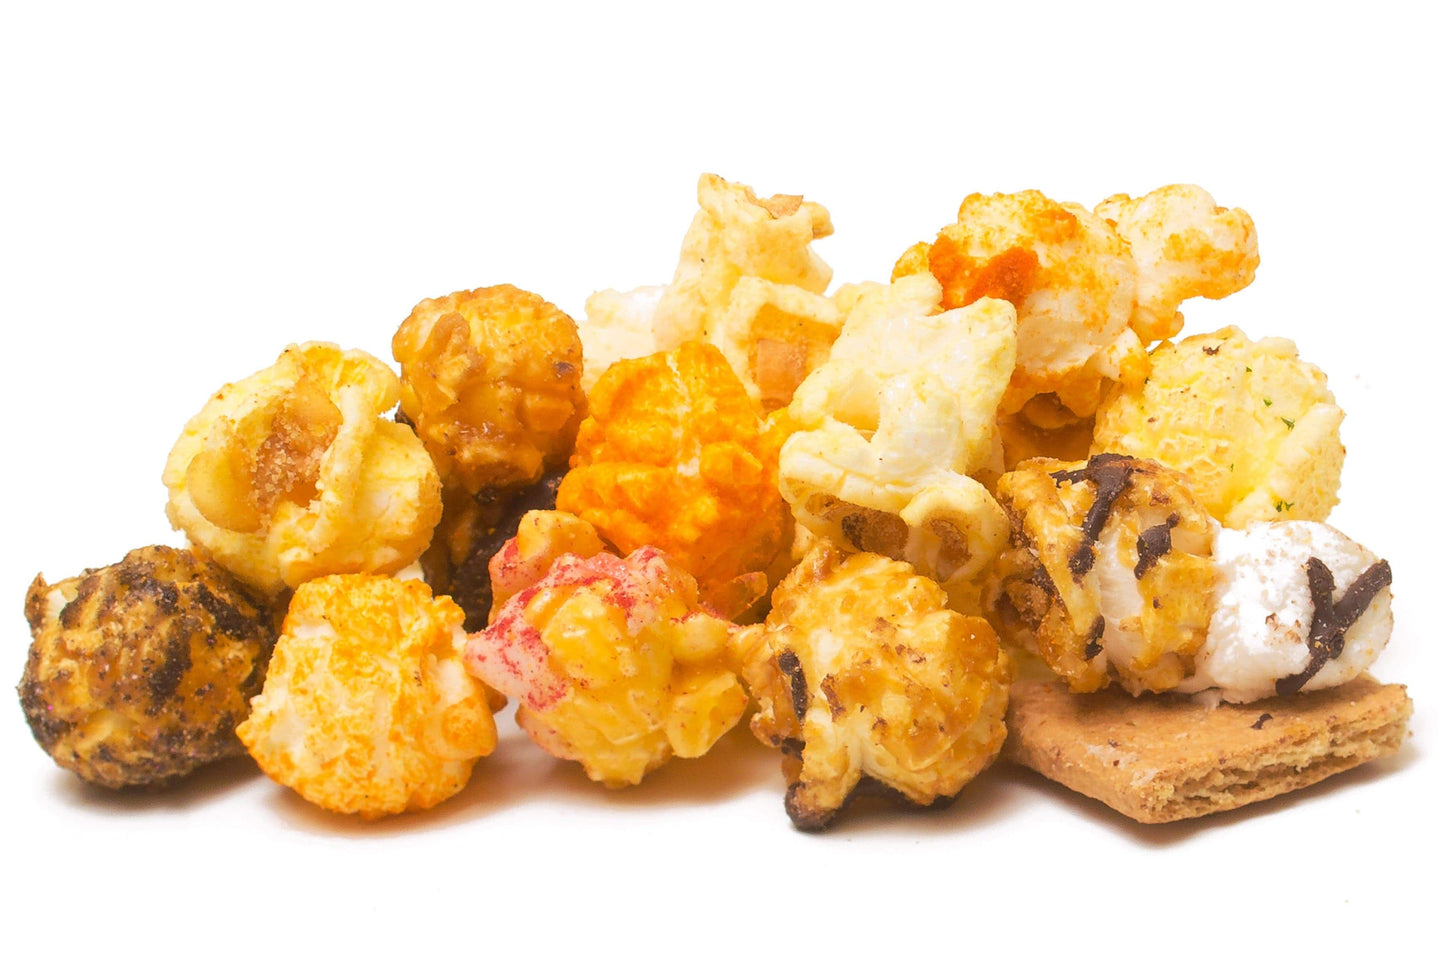 popped las vegas gourmet popcorn Indulge in the Irresistible Blend of Sweet Flavors with Our Dirty Vegas Gourmet Popcorn Mix! Elevate Your Snack Game with this Unique and Decadent Treat. Handcrafted with Premium Ingredients for Optimal Flavor Explosion. Satisfy Your Sweet Tooth with a Medley of Delicious Tastes. Order Now to Experience the Ultimate Sweet Snacking SensationDirty Vegas | Sweet Mix of all of our Gourmet Popcorn Flavors